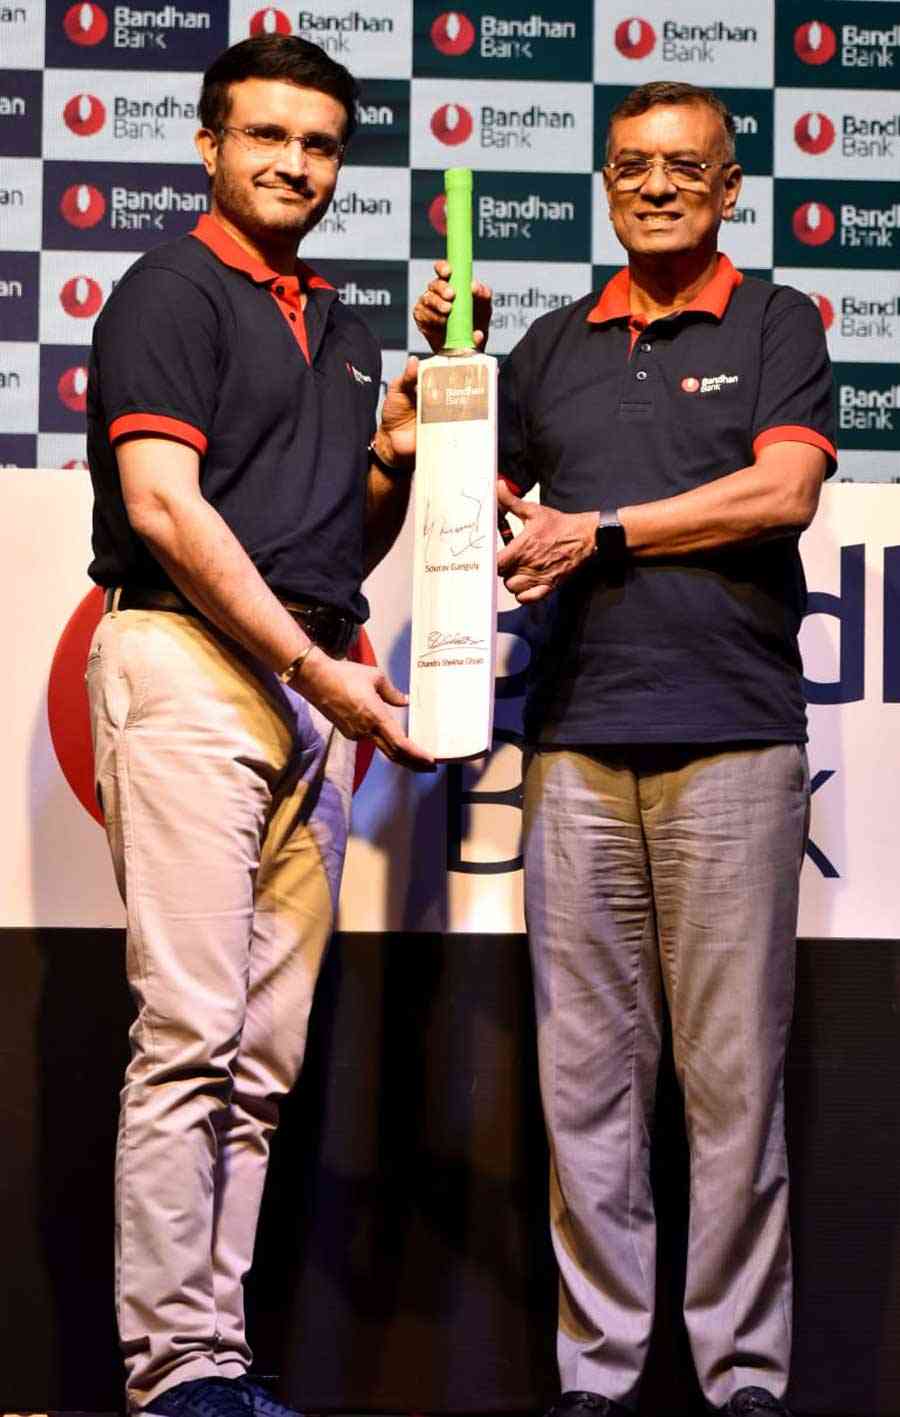 Bandhan Bank on Thursday announced Sourav Ganguly as its brand ambassador at an event in Kolkata. The bank’s MD and CEO, Chandra Shekhar Ghosh, said, “Sourav has been one of the most successful captains of the Indian cricket team due to his foresight, dedication and commitment to the game. There is a lot of congruence in the values that Sourav and Bandhan Bank embody. He is also a global icon and commands respect from all quarters. Speaking about the association, Sourav Ganguly said, “I have seen the rise of brand Bandhan from close quarters, and I am proud of the progress it has made in such a short time span."